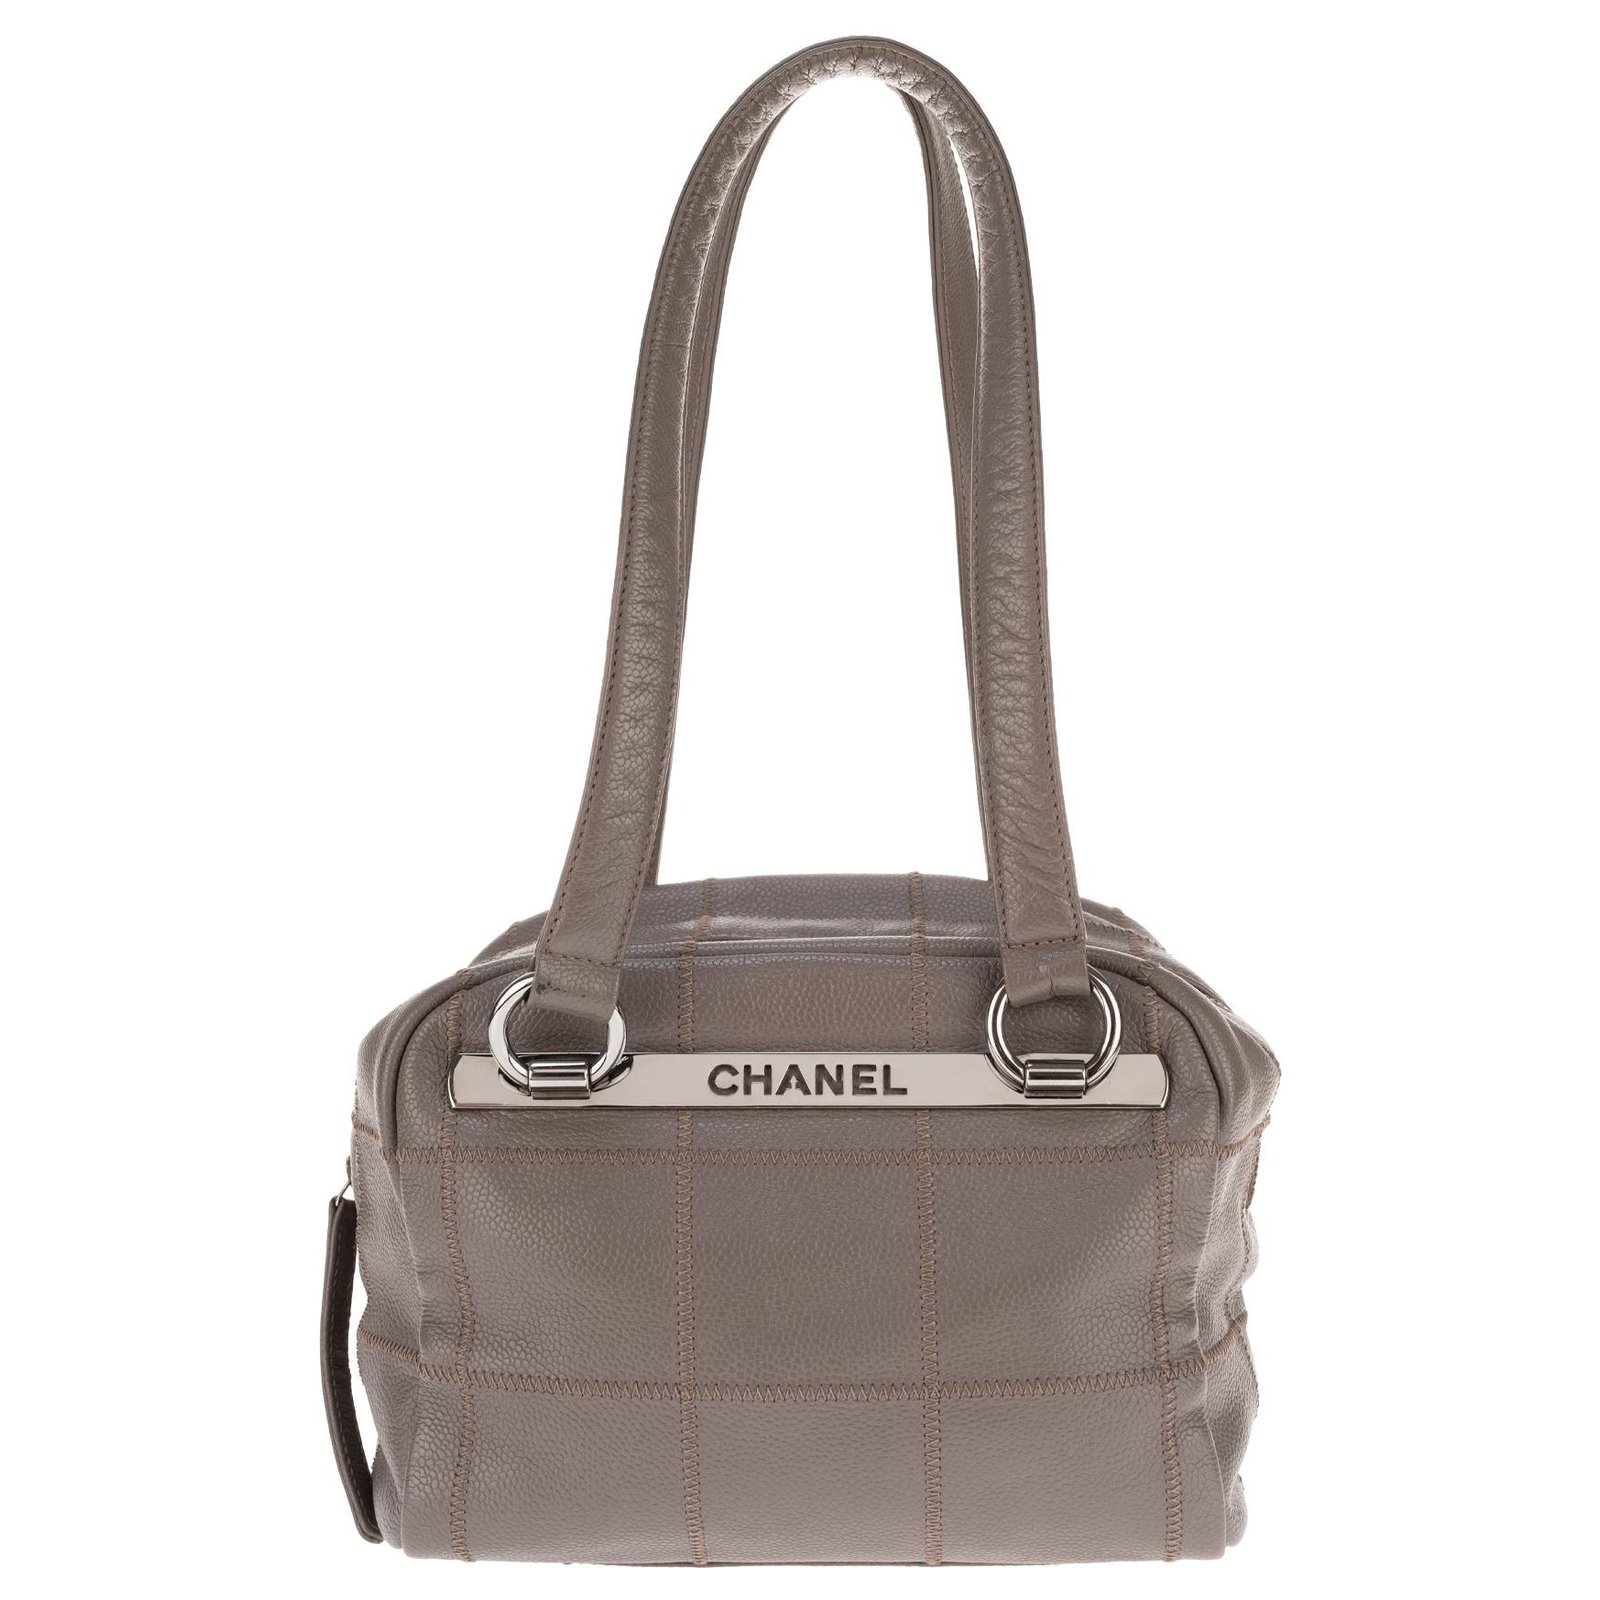 Lovely Chanel cube bag in gray grained leather in very good condition! Grey   - Joli Closet